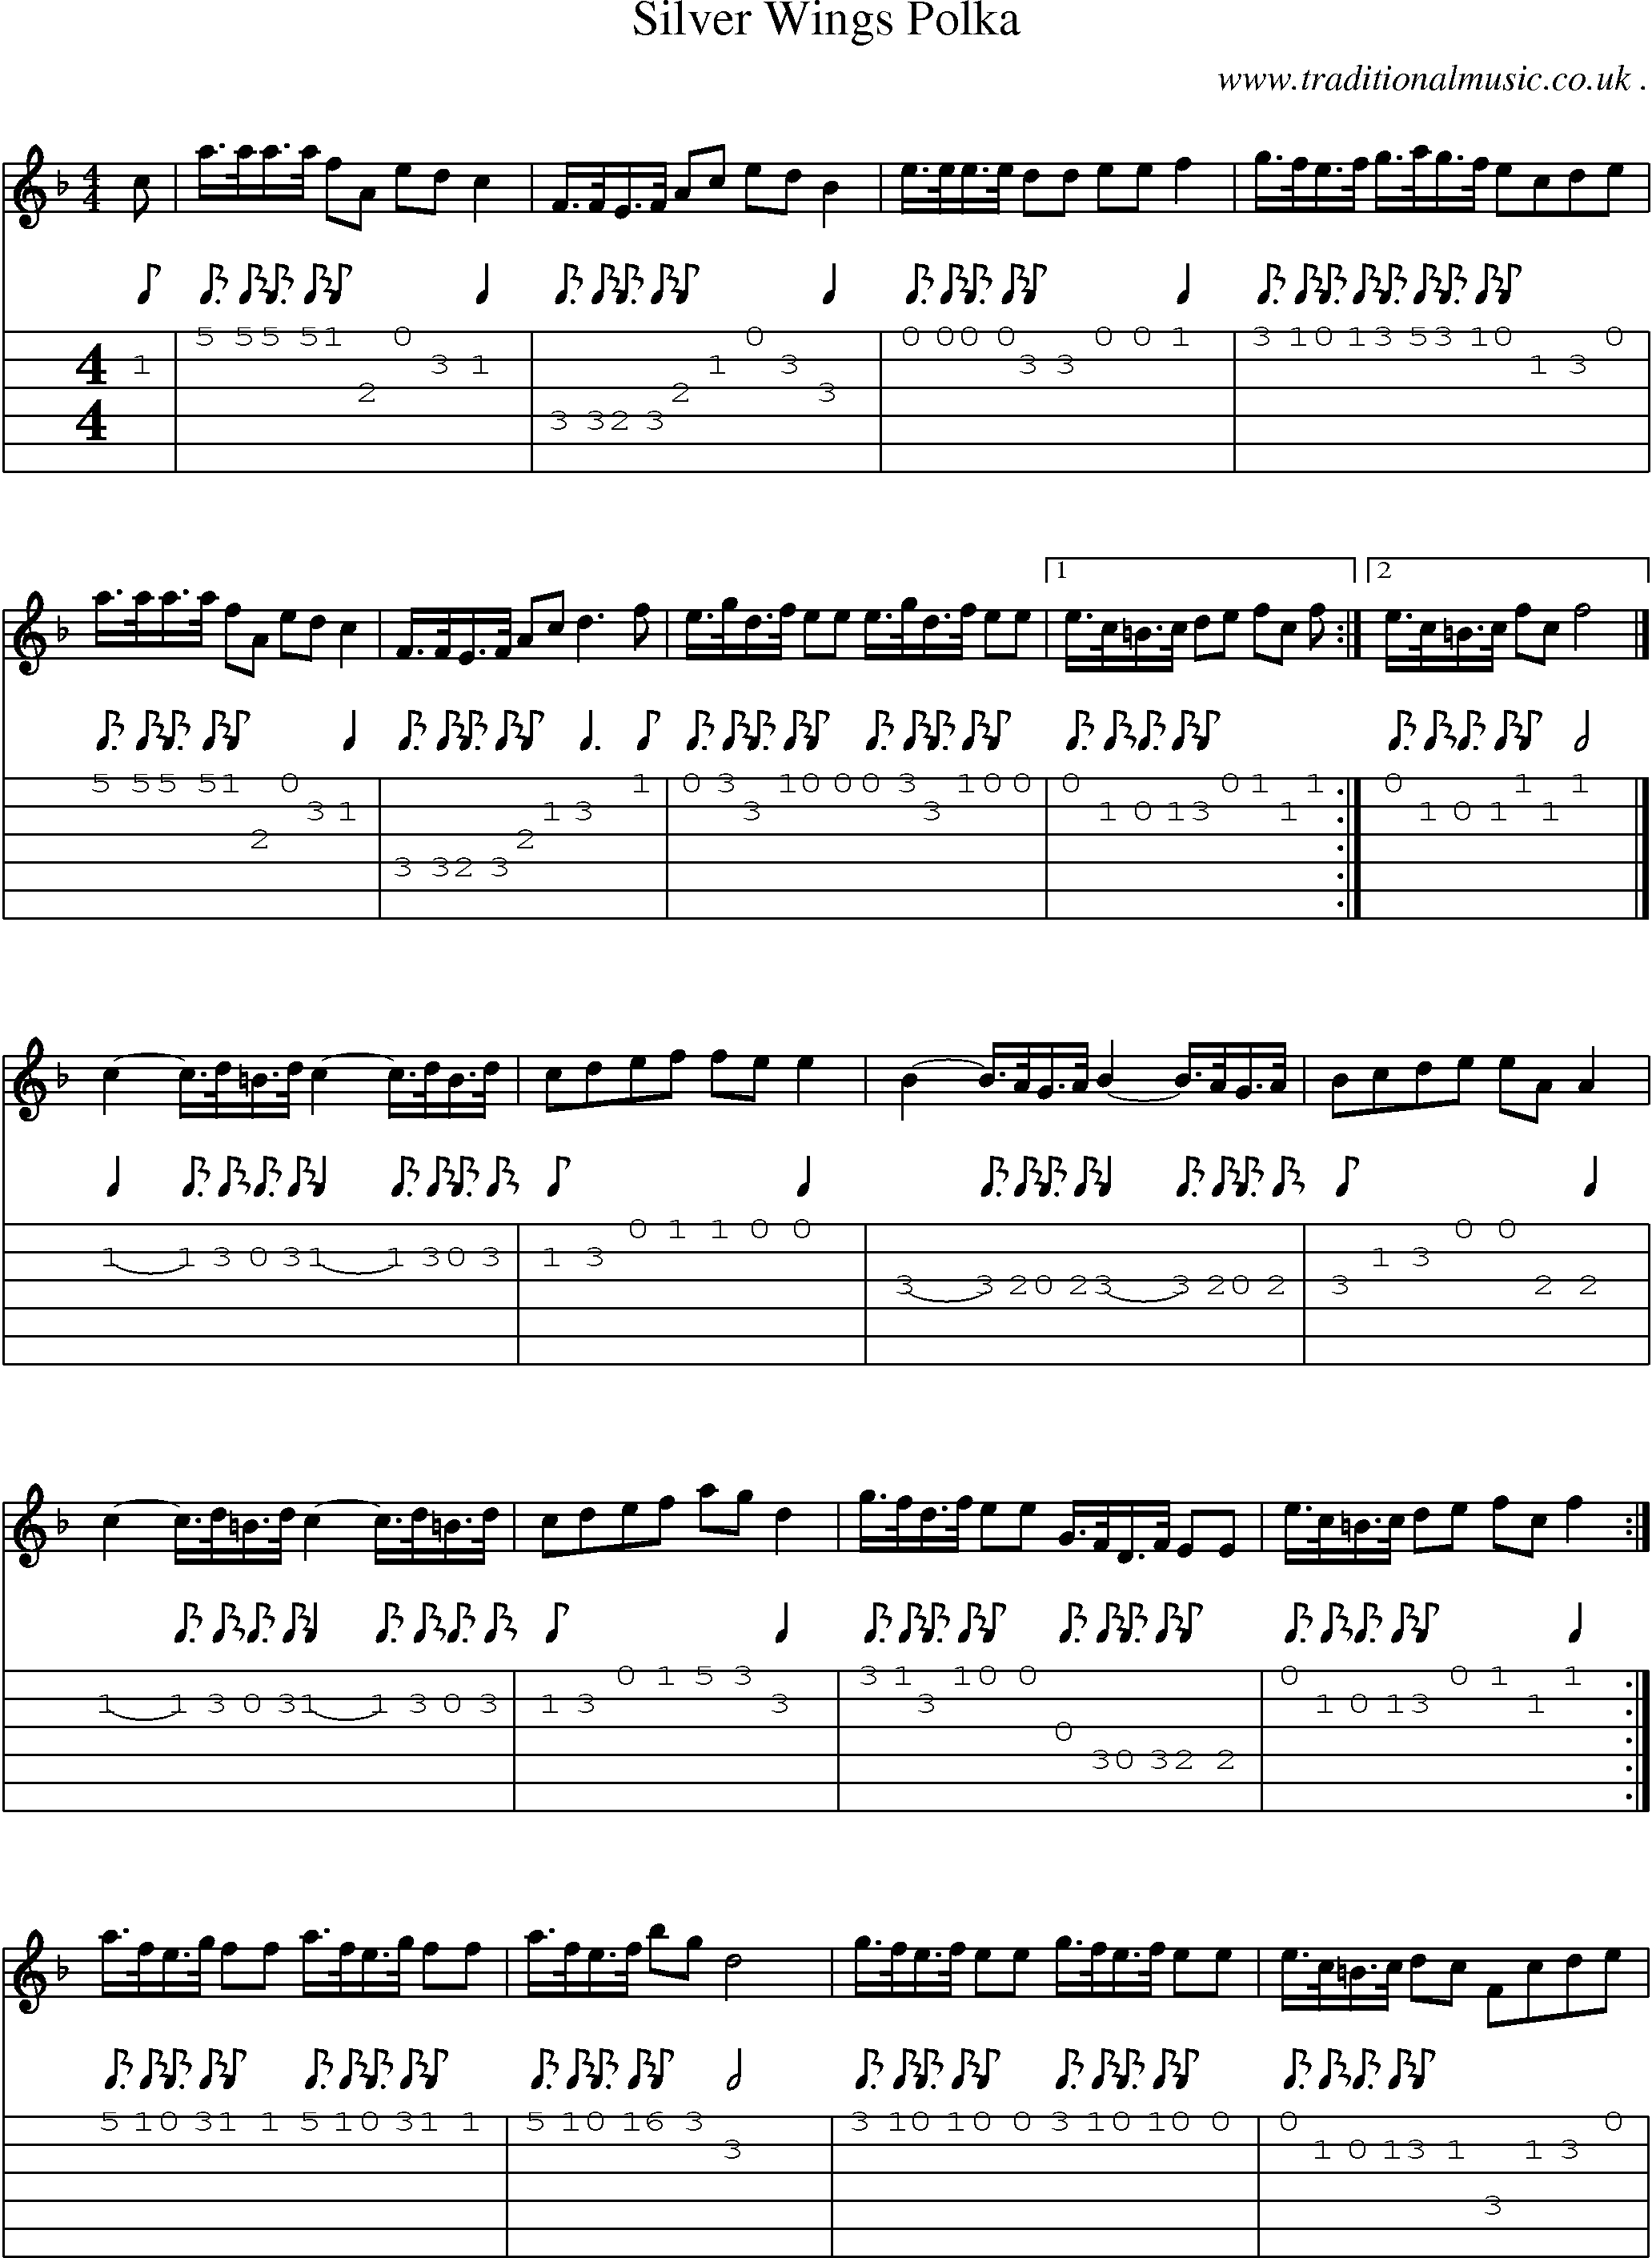 Sheet-music  score, Chords and Guitar Tabs for Silver Wings Polka